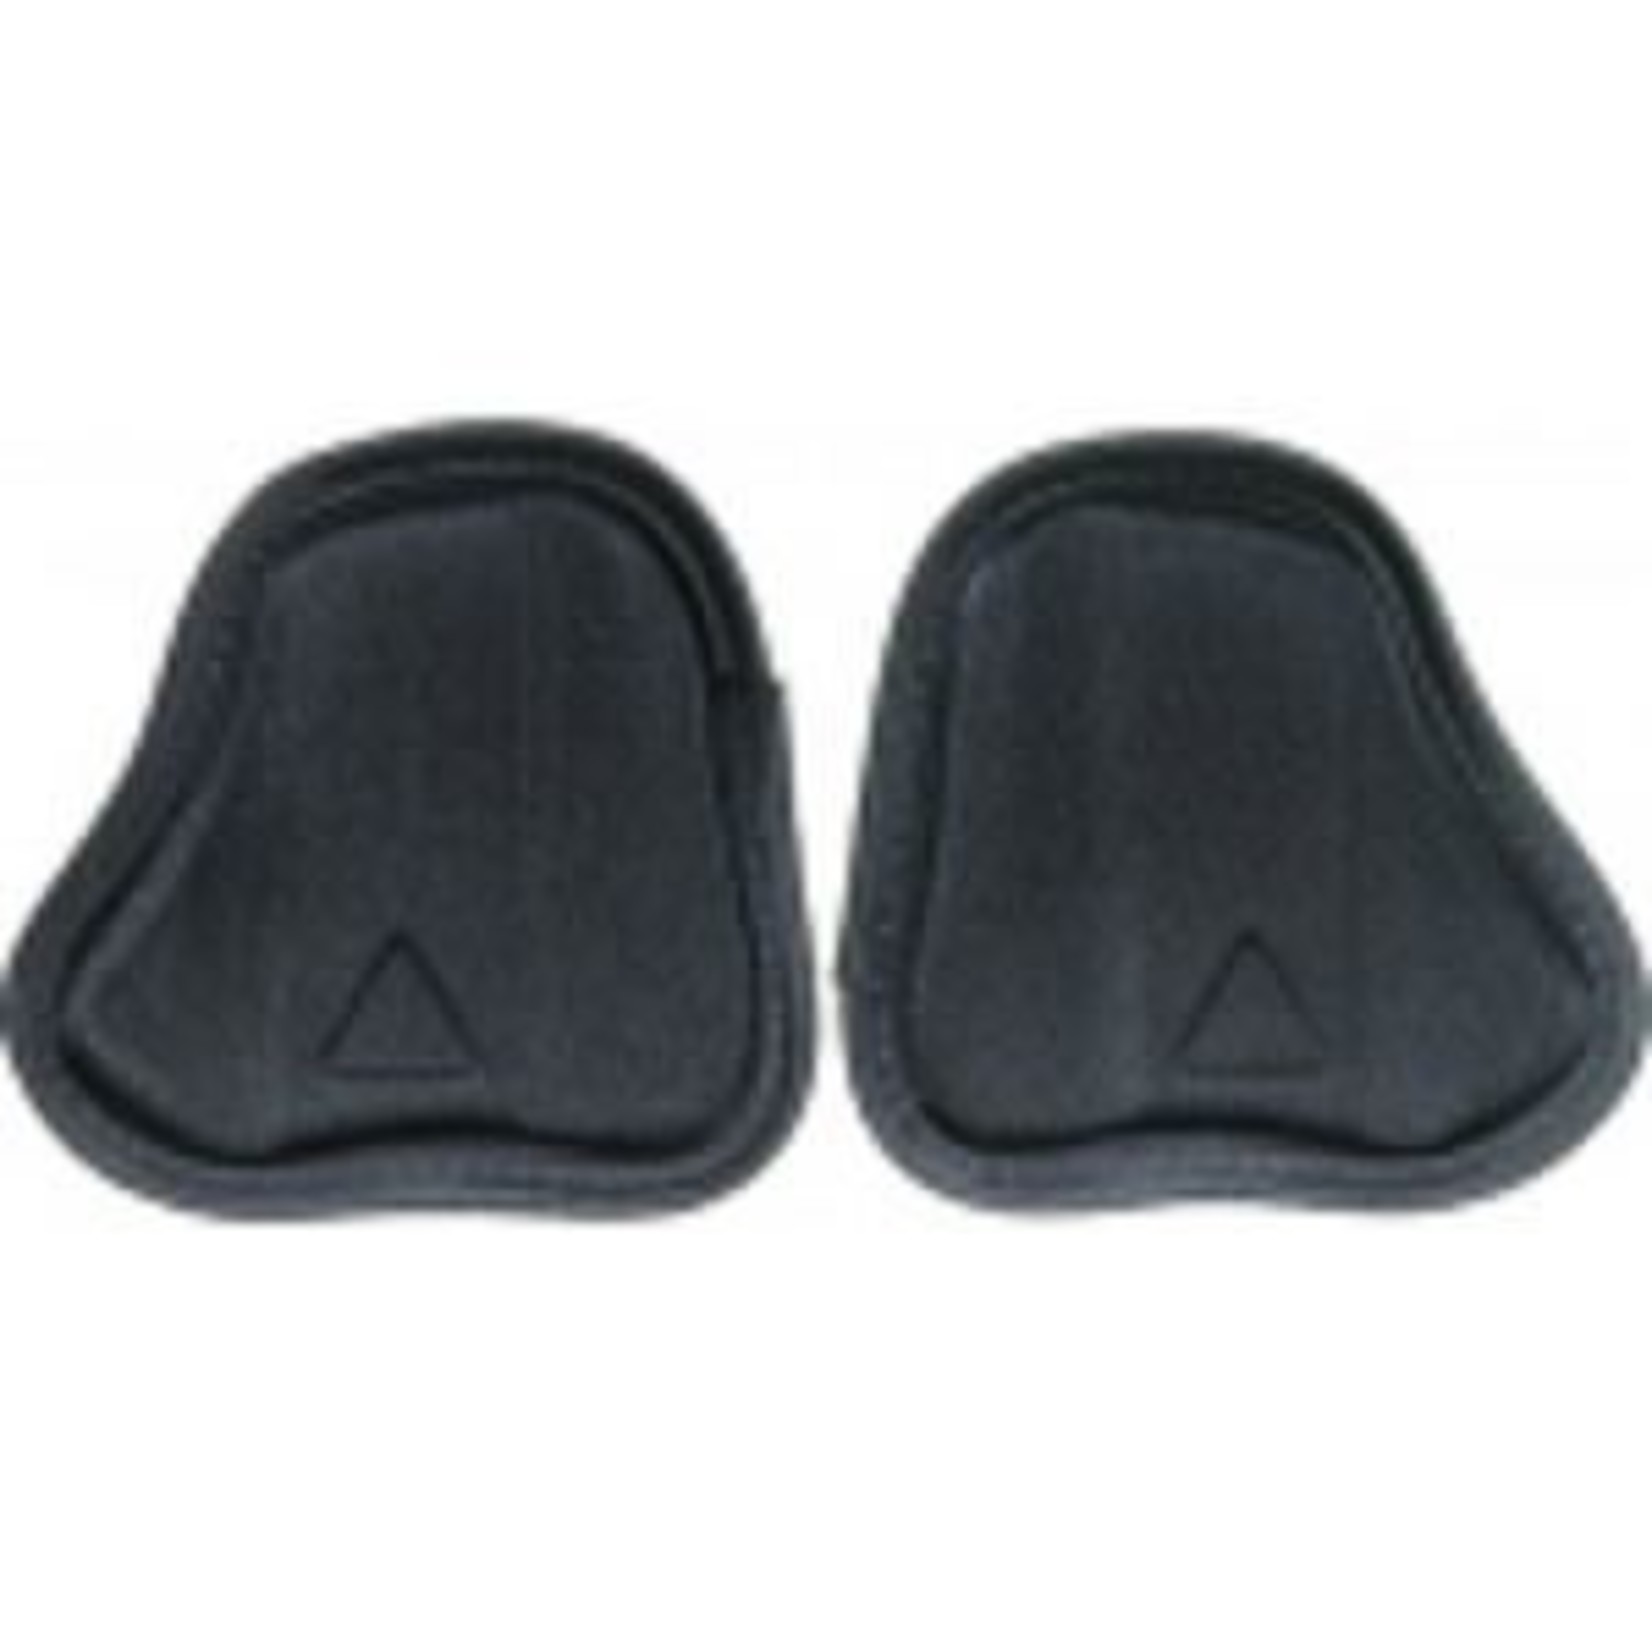 Profile Profile Design F-25 Armrest Kit - Carbon Include Pads And Mounting Hardware